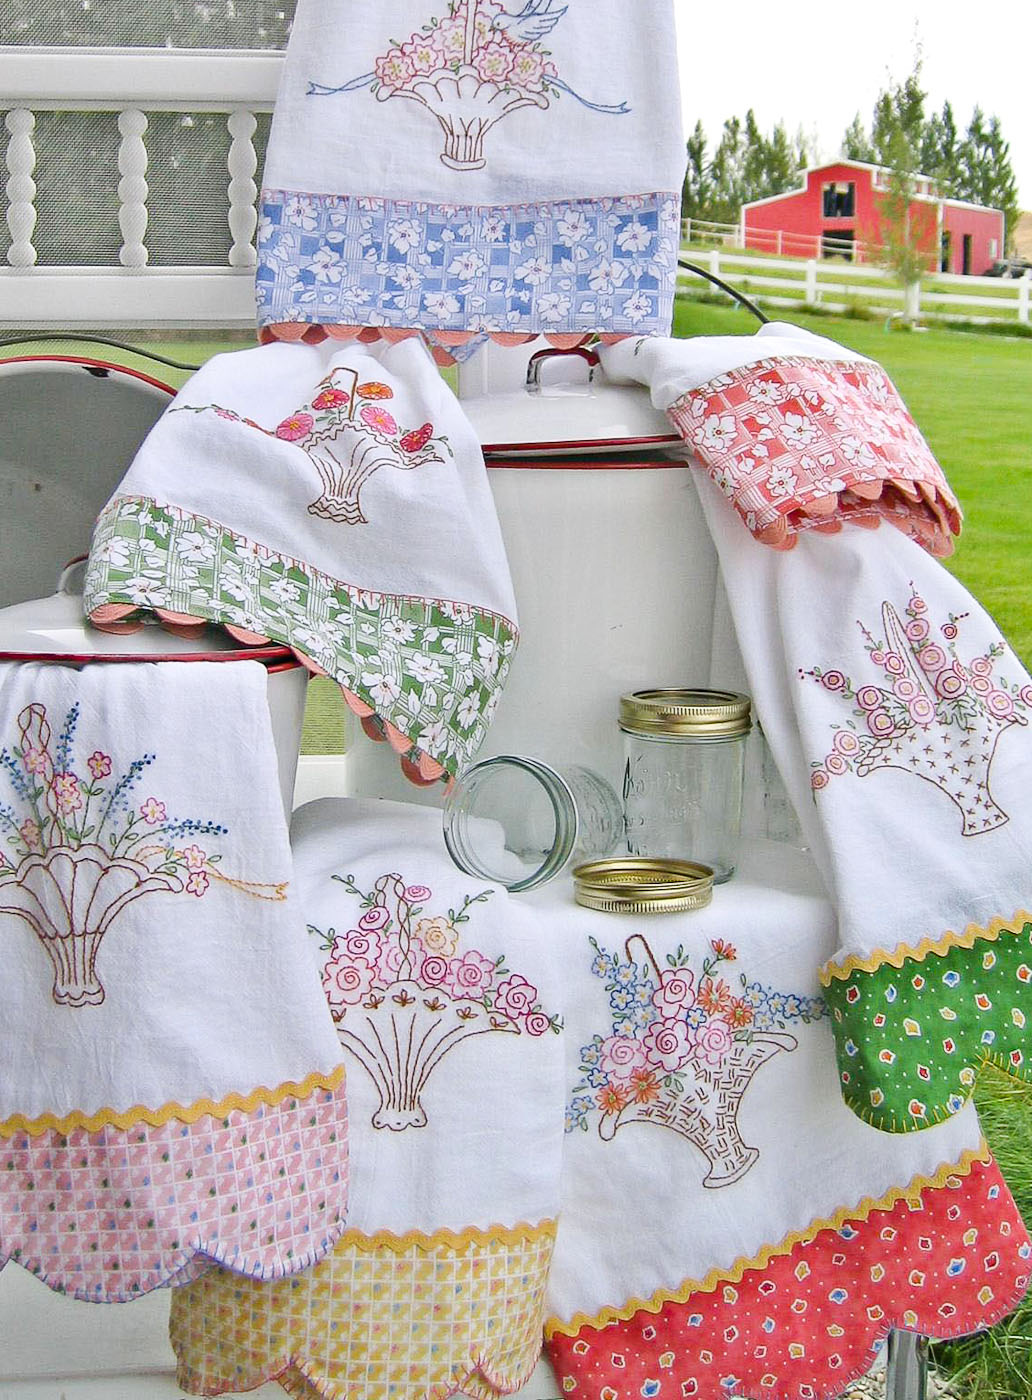 Free Hand Embroidery Patterns For Tea Towels Hand Embroidery Pattern Grandmas Tea Towels